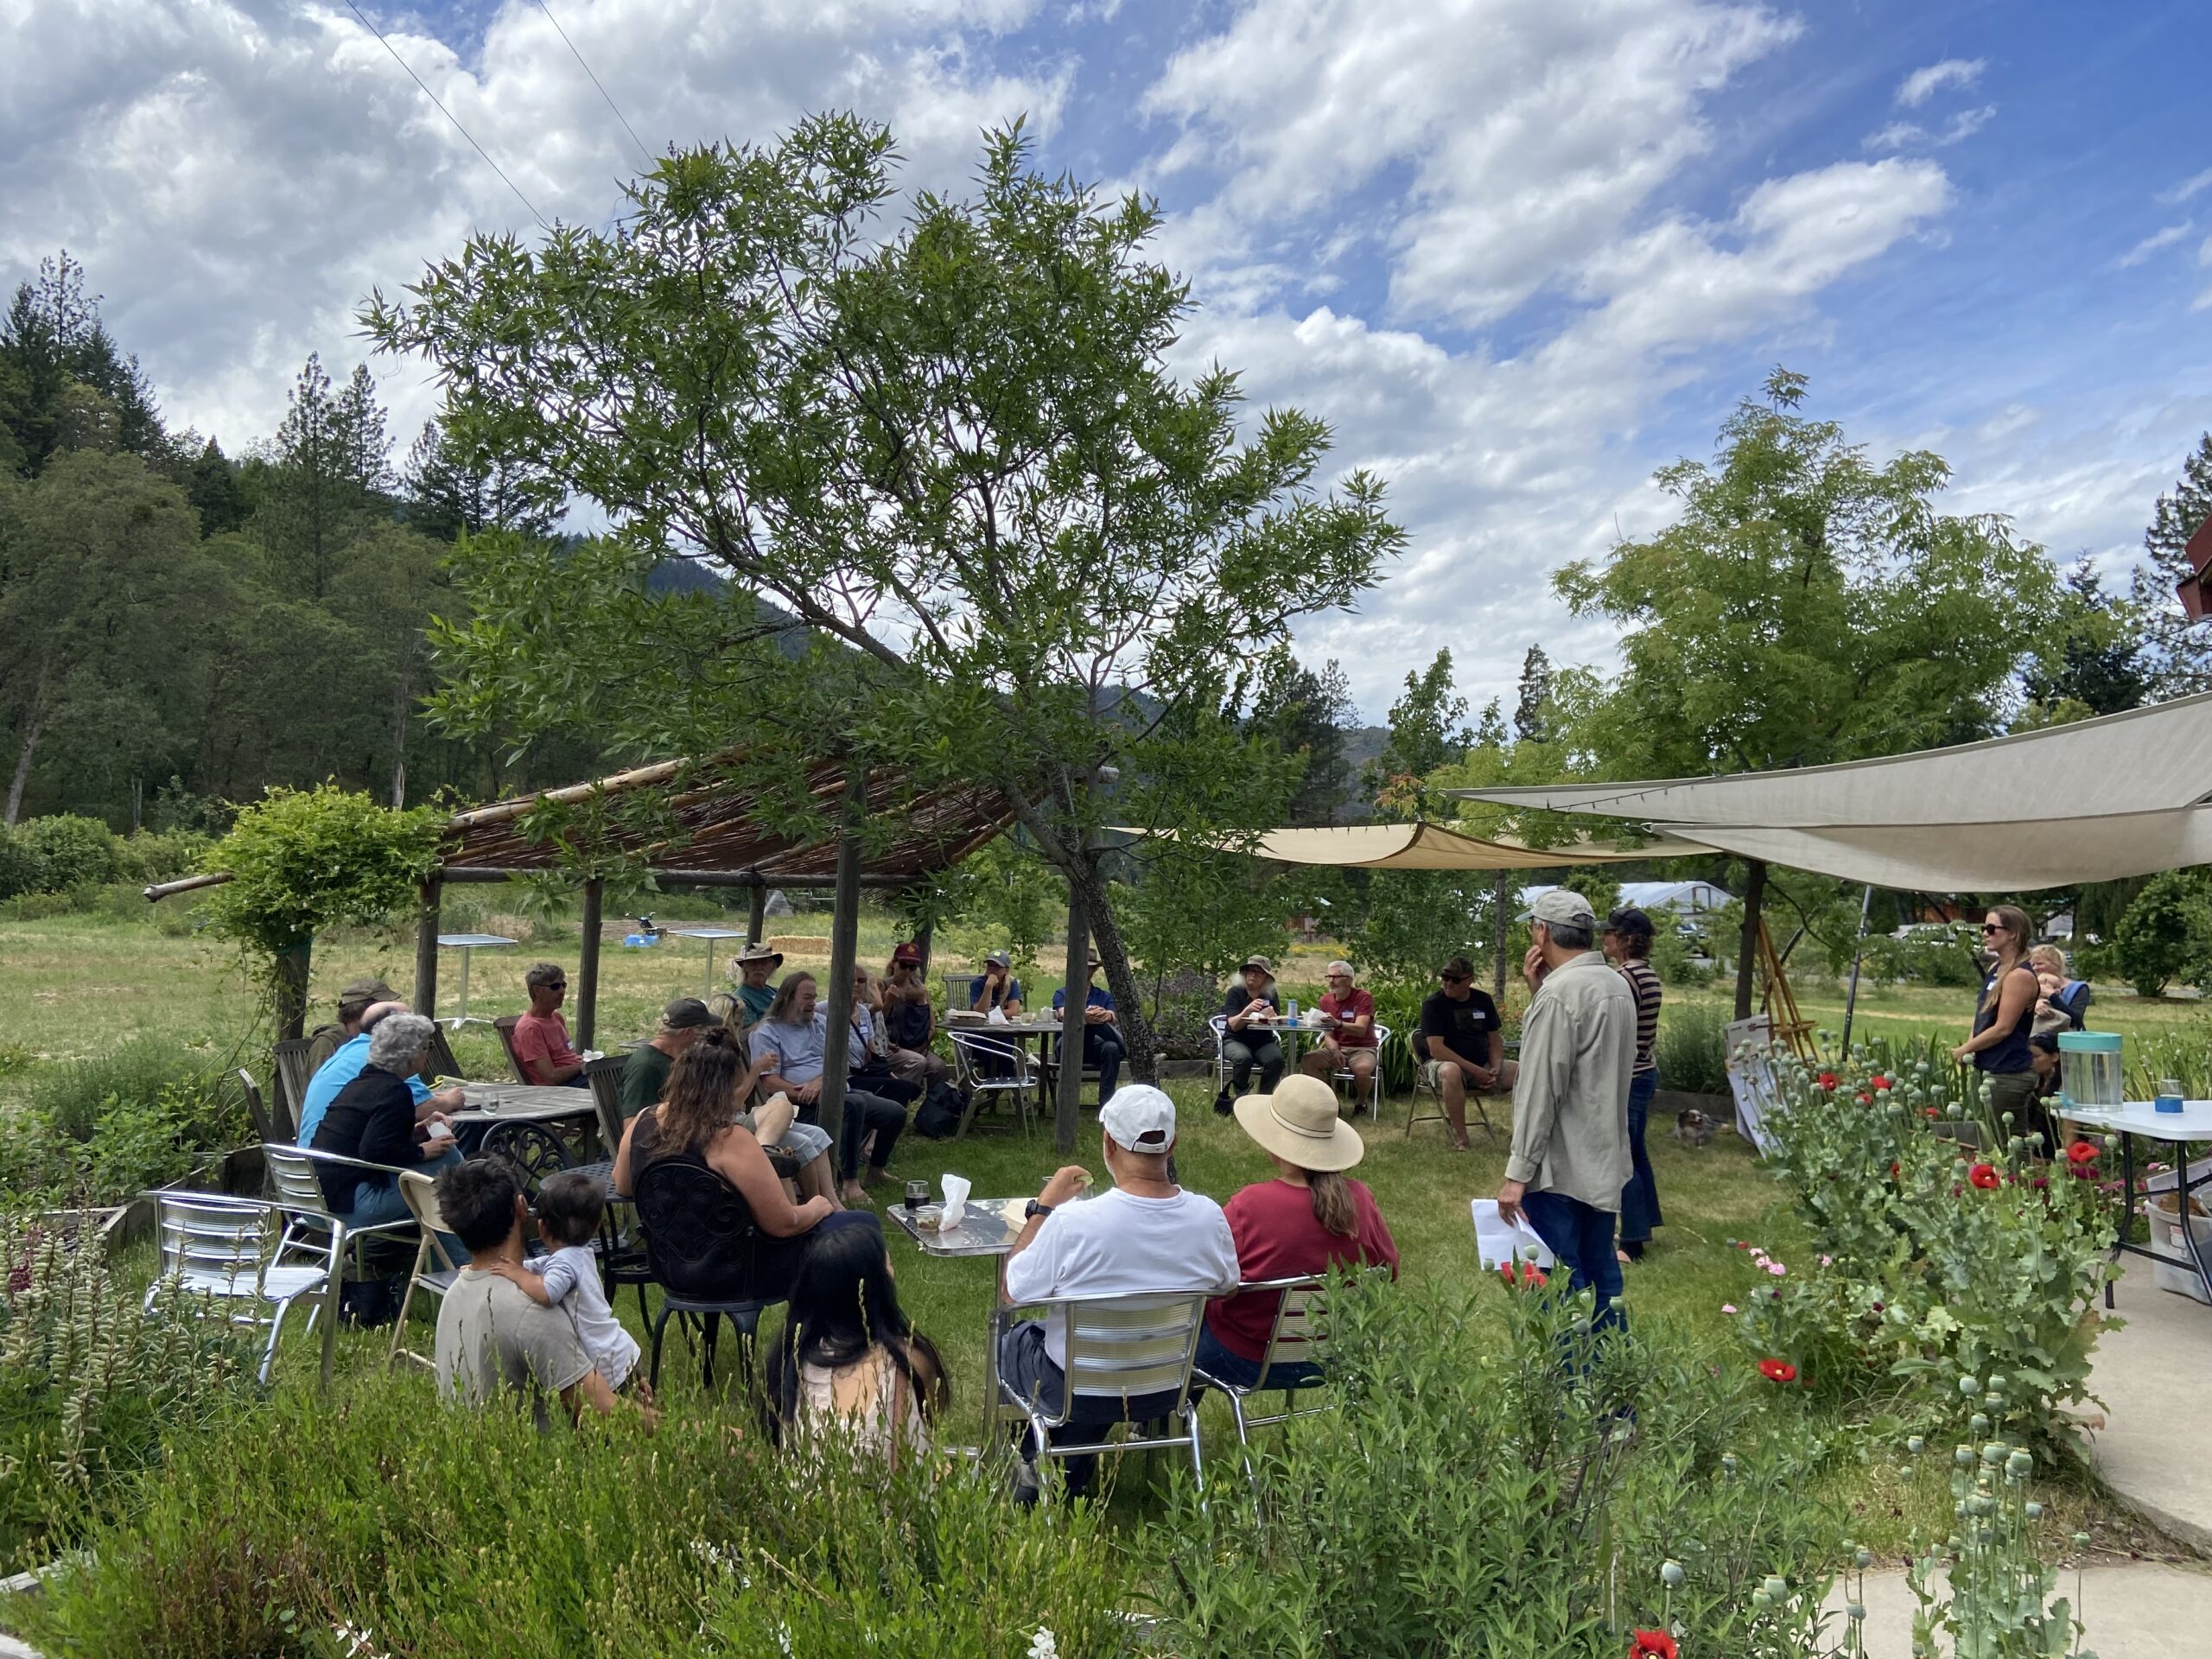 Applegate Valley Vision Work Highlighted in FICB’s Rural Community Builder Connect Newsletter